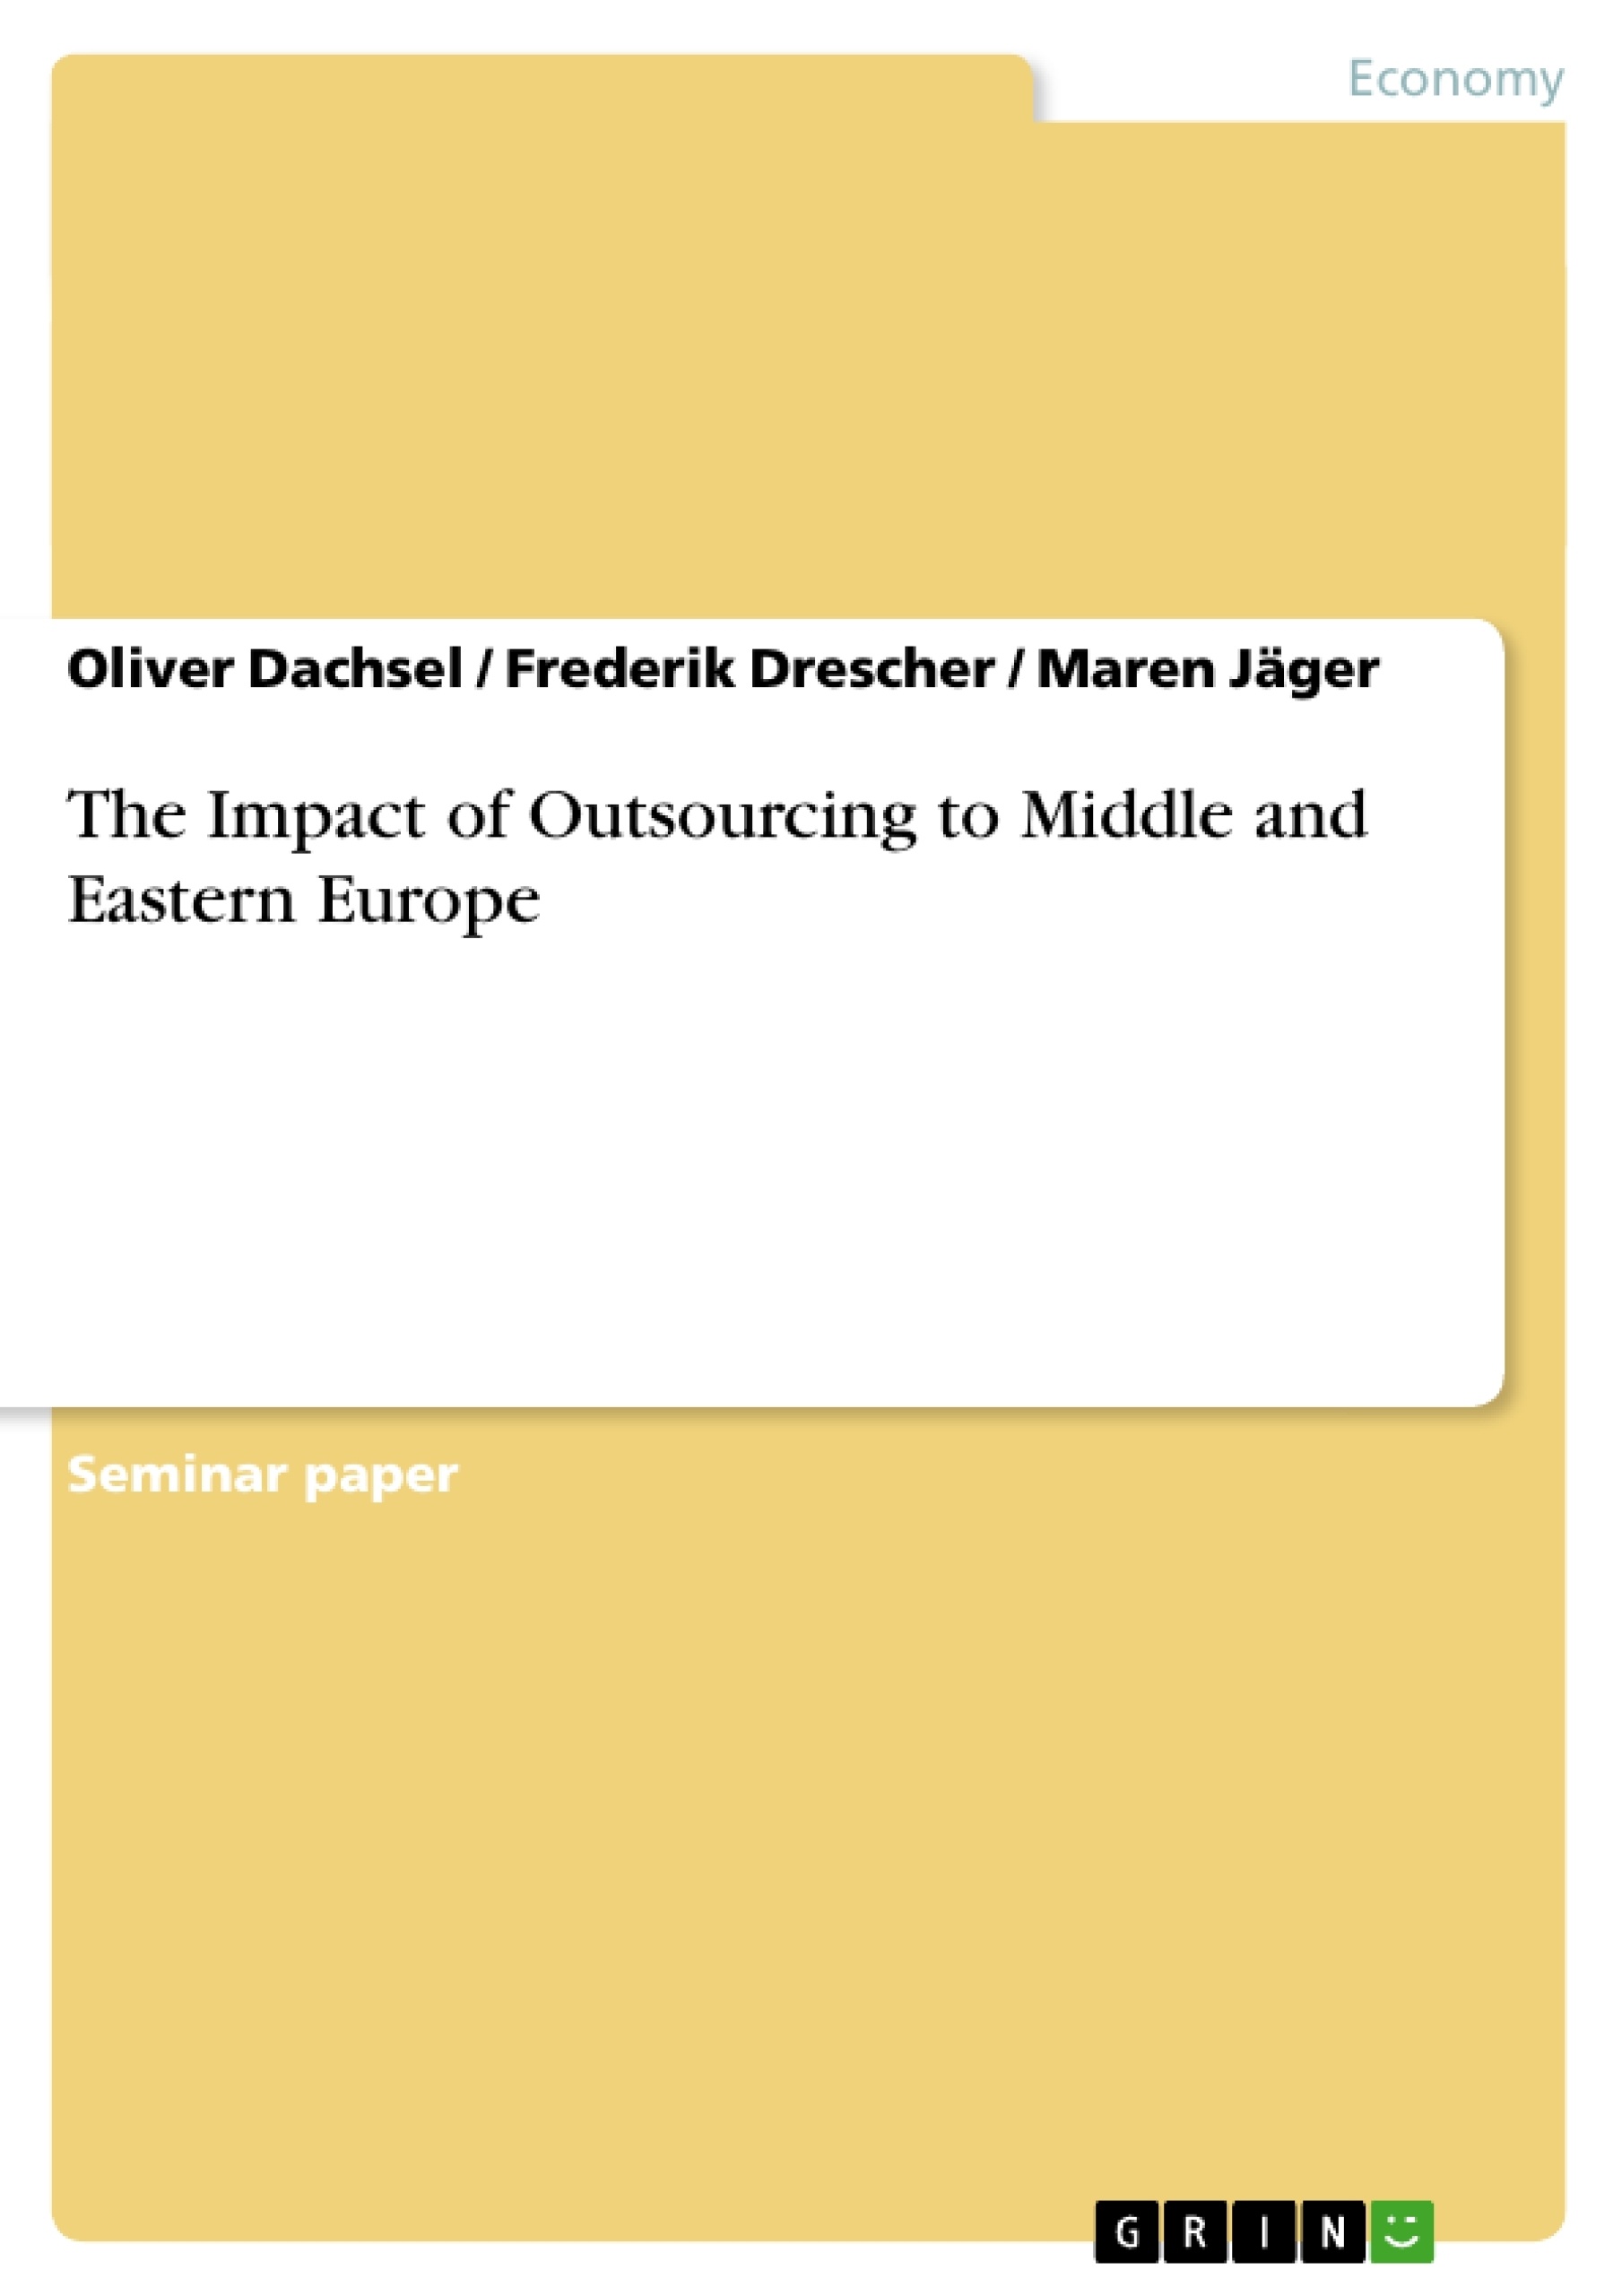 Title: The Impact of Outsourcing to Middle and Eastern Europe